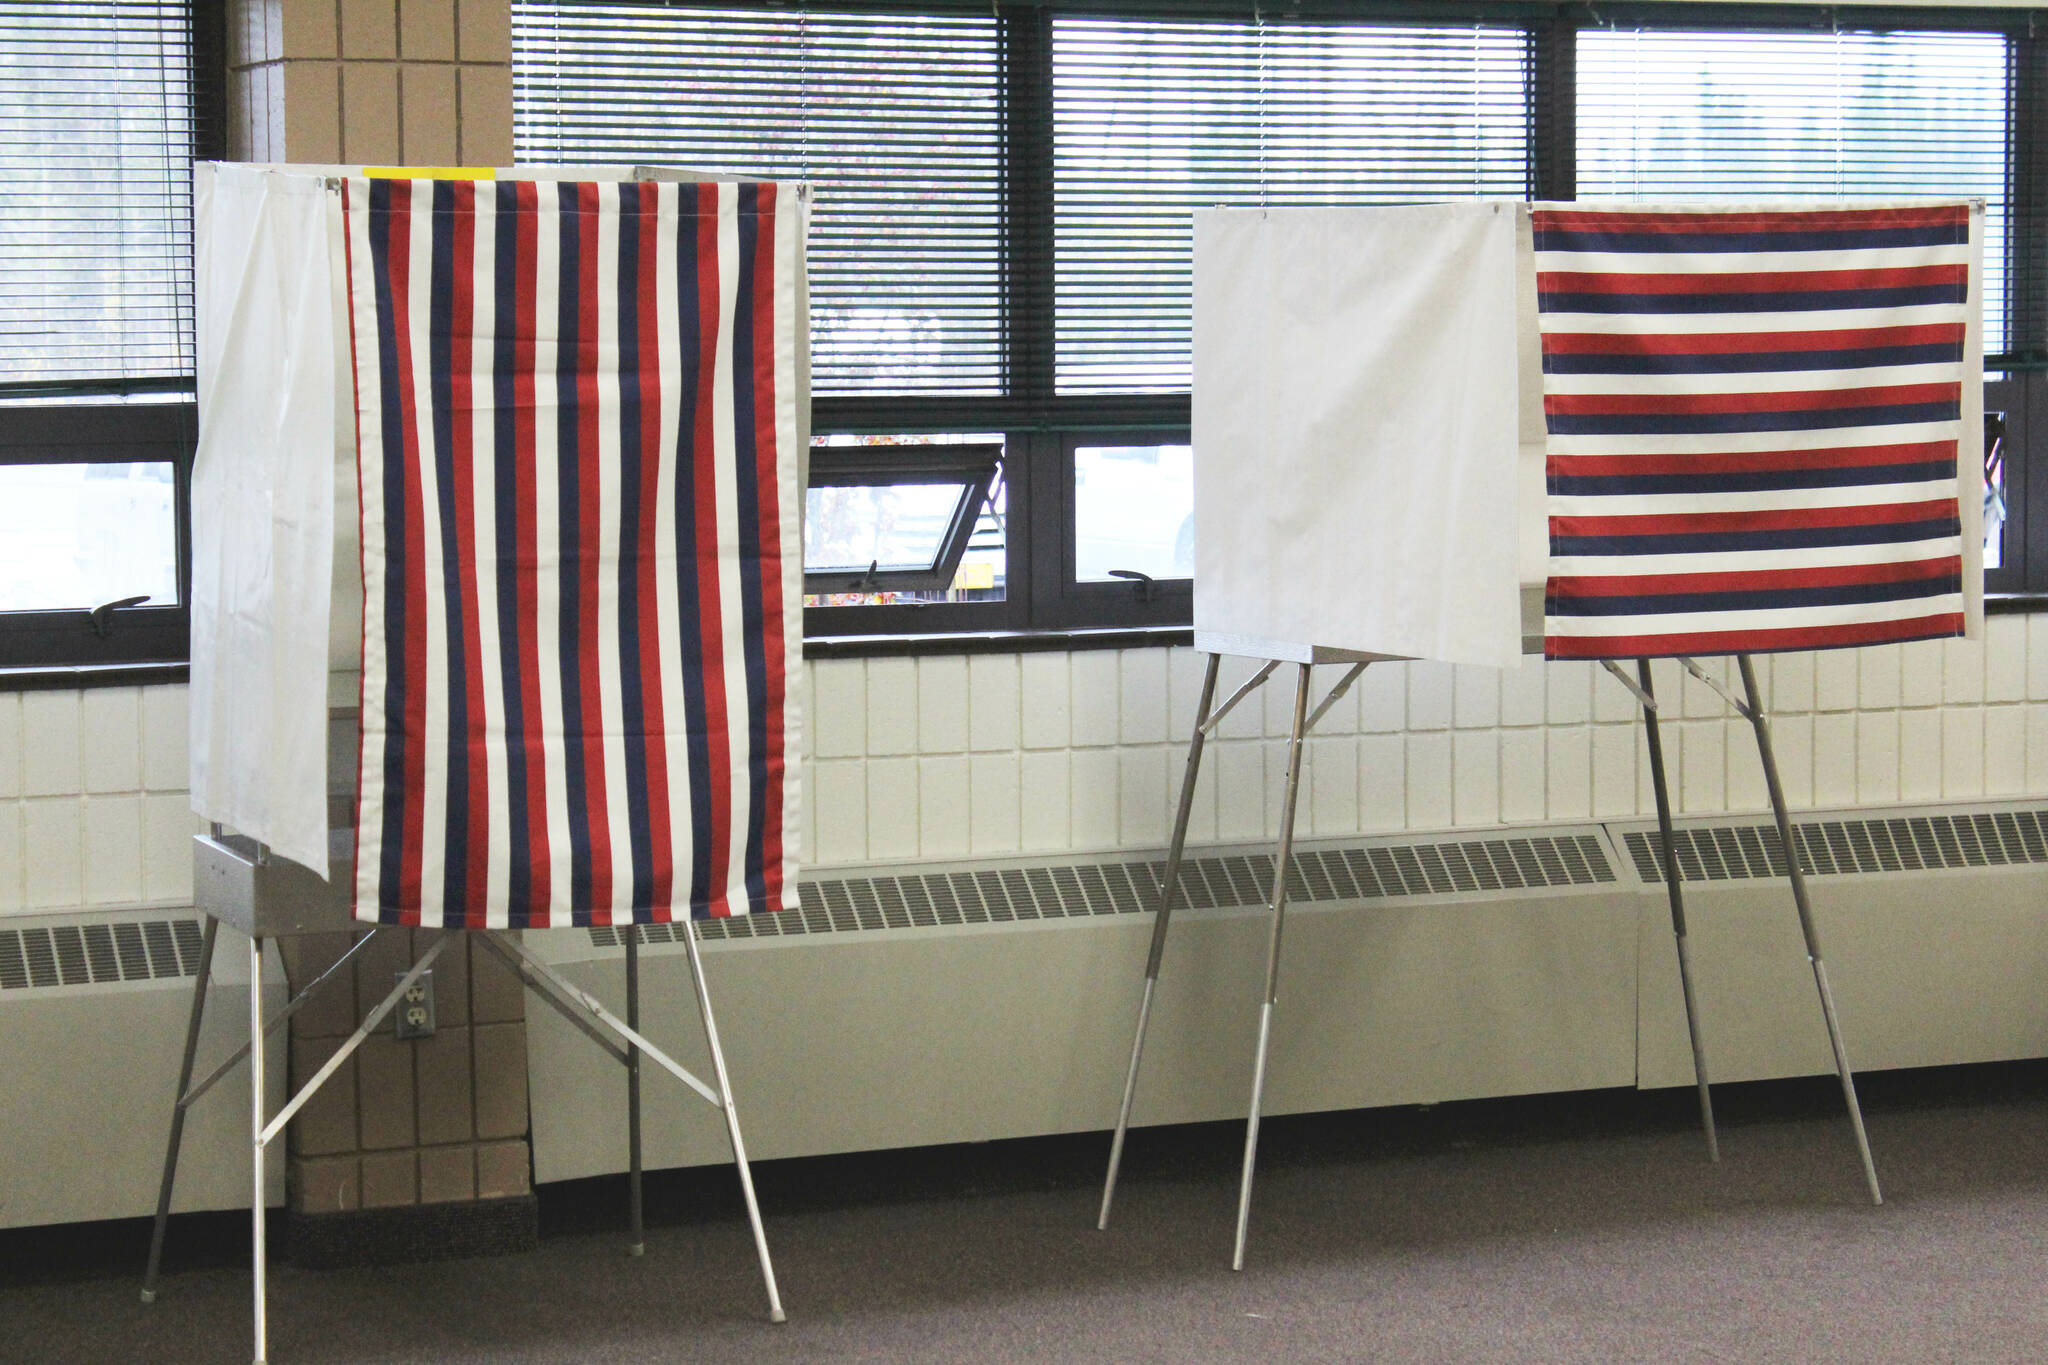 Voting booths are set up at the Soldotna Regional Sports Complex on Tuesday, Oct. 4, 2022, in Soldotna, Alaska. (Ashlyn O’Hara/Peninsula Clarion)